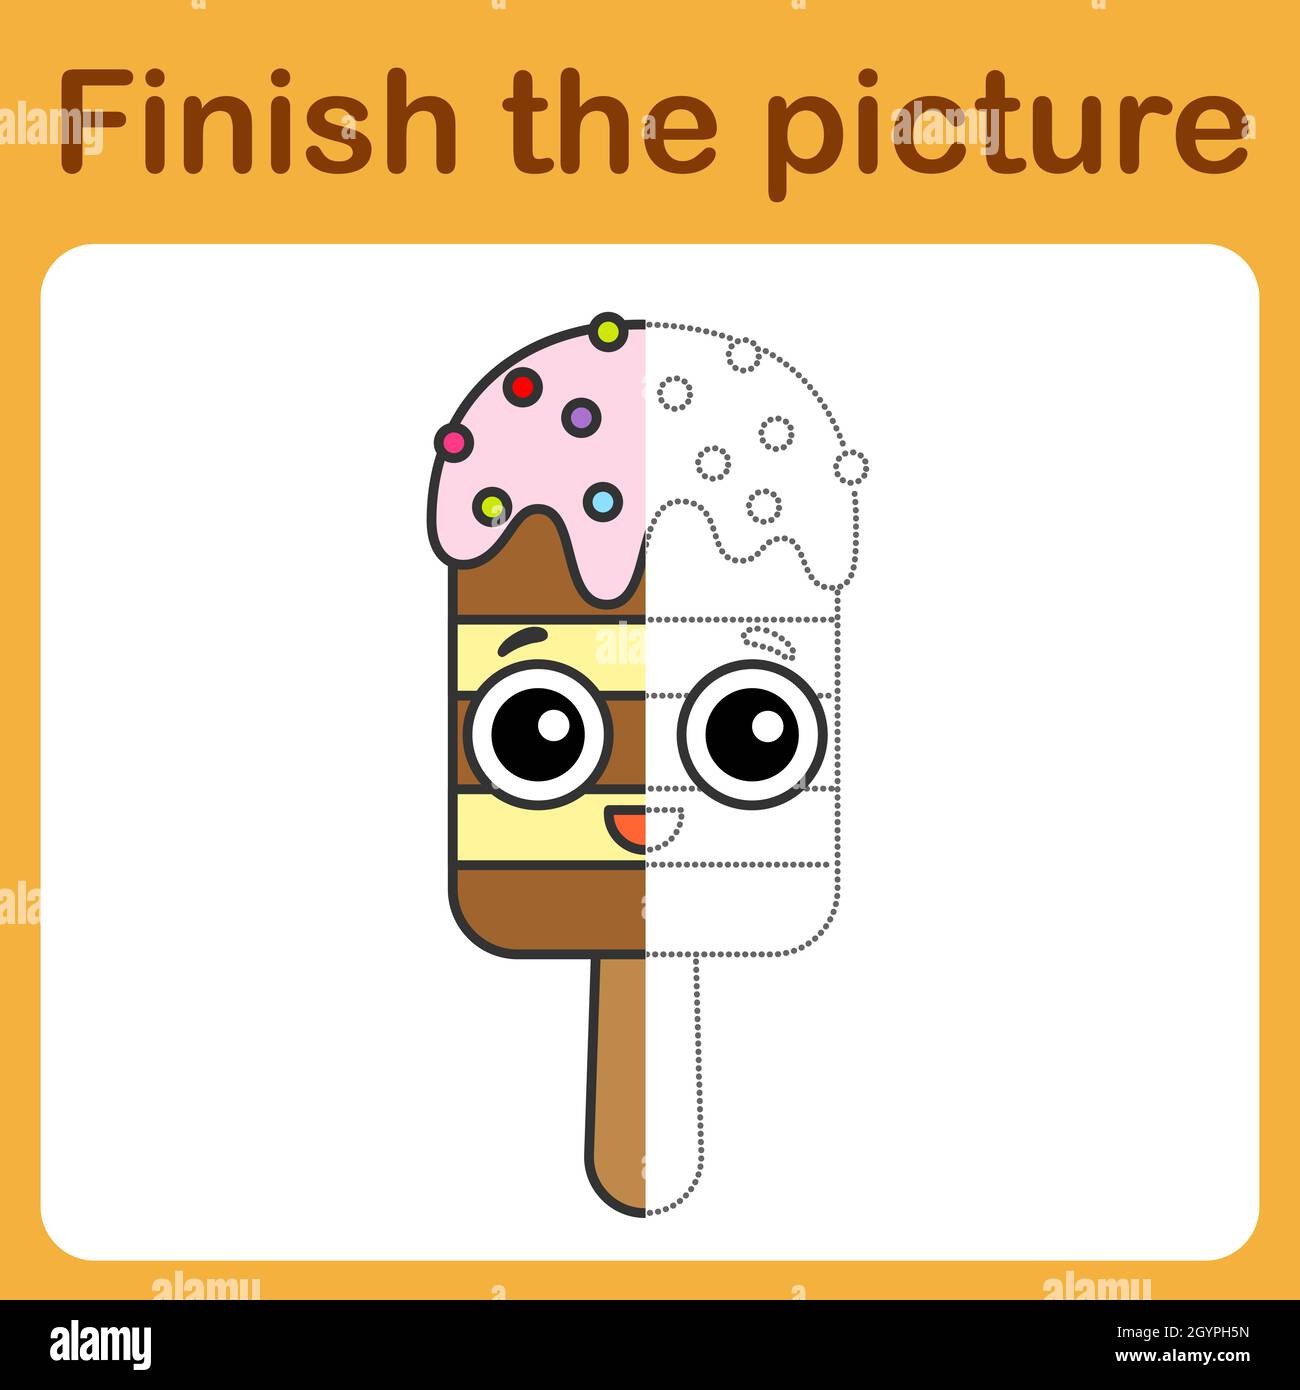 How to Draw Ice Cream - Easy Drawing Tutorial For Kids-saigonsouth.com.vn